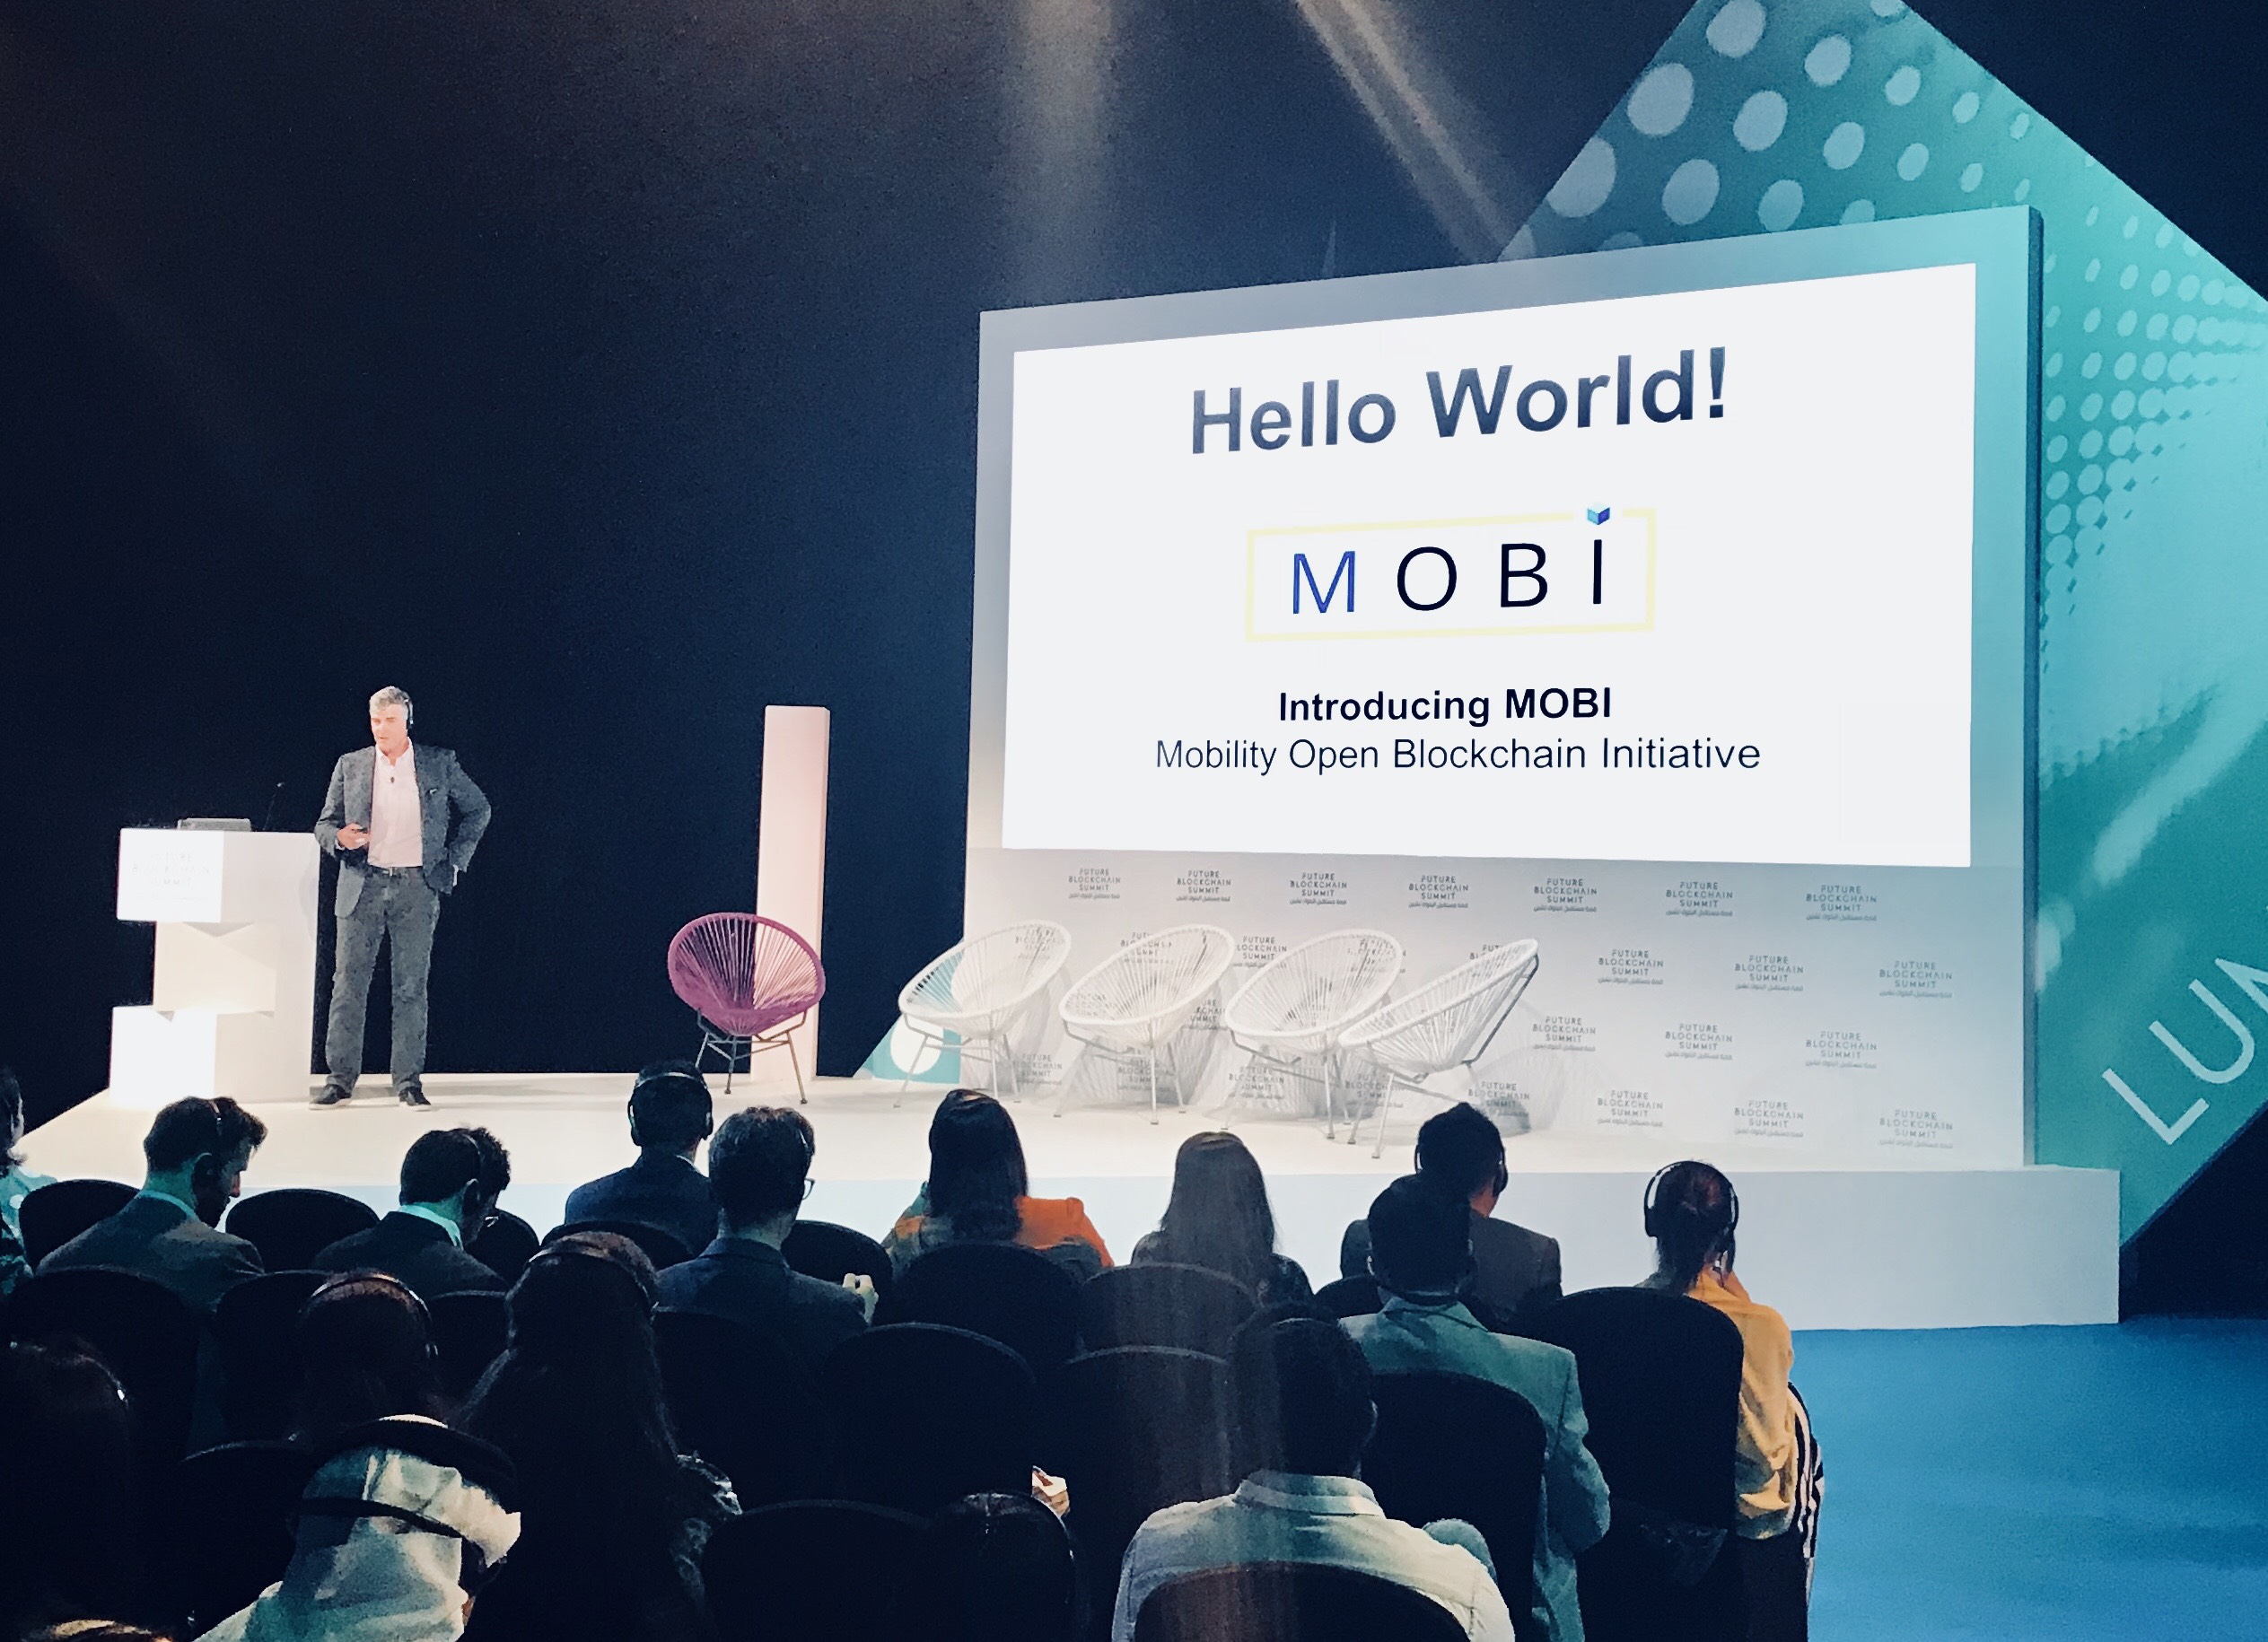 Outlier Ventures joins major automakers, startups, technology companies and others to launch Mobility Open Blockchain Initiative (MOBI) Outlier Ventures